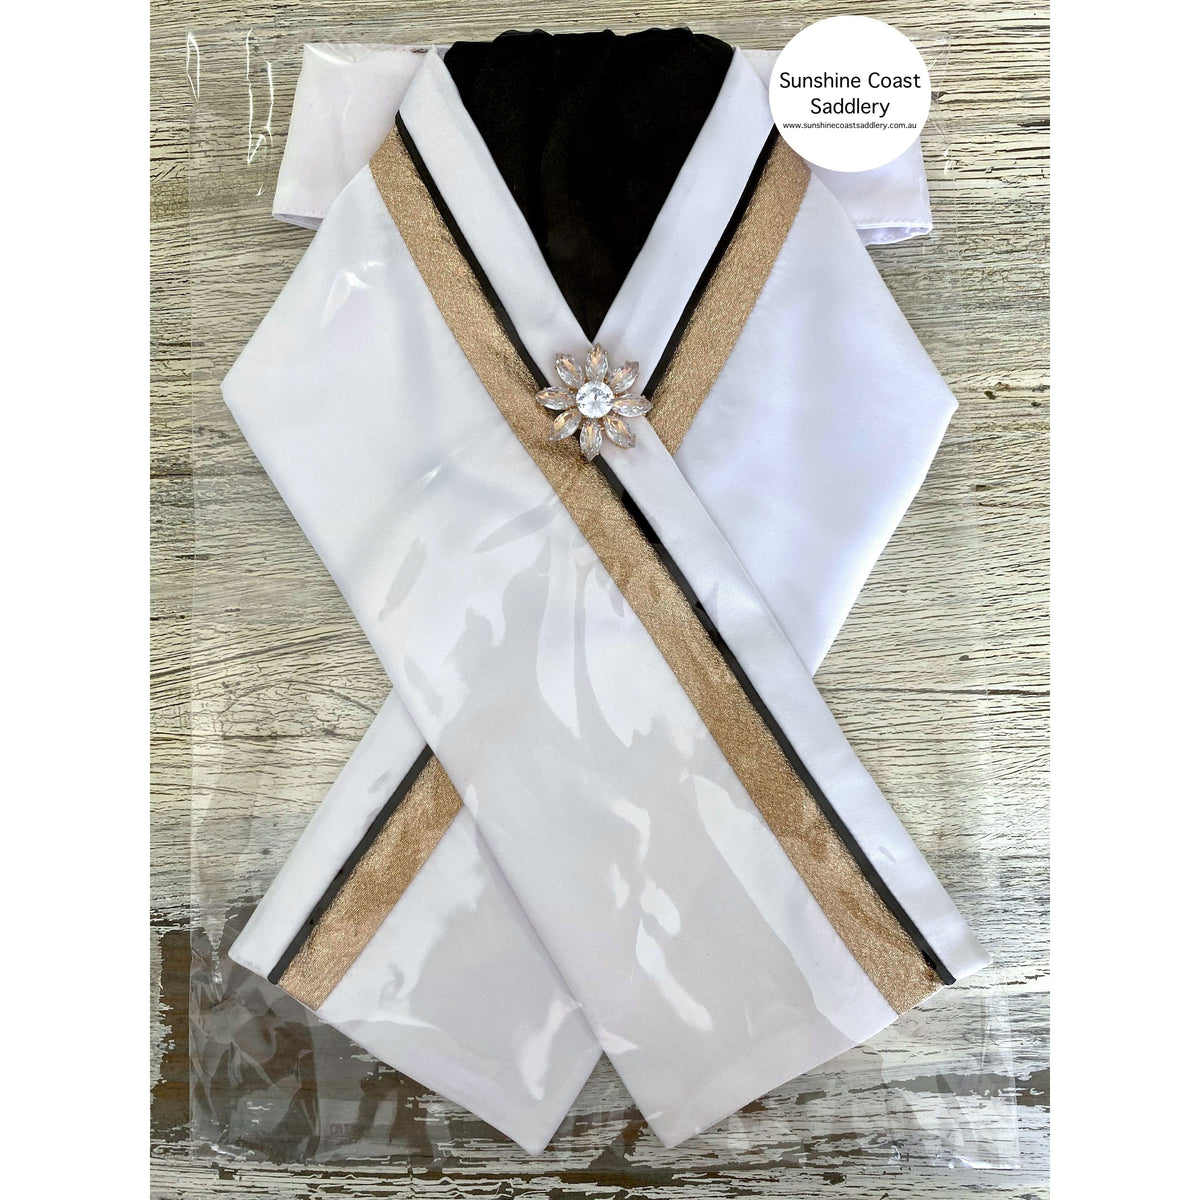 L SHARP Pre-Tied Satin Stock Tie in White with Black and Rose Gold